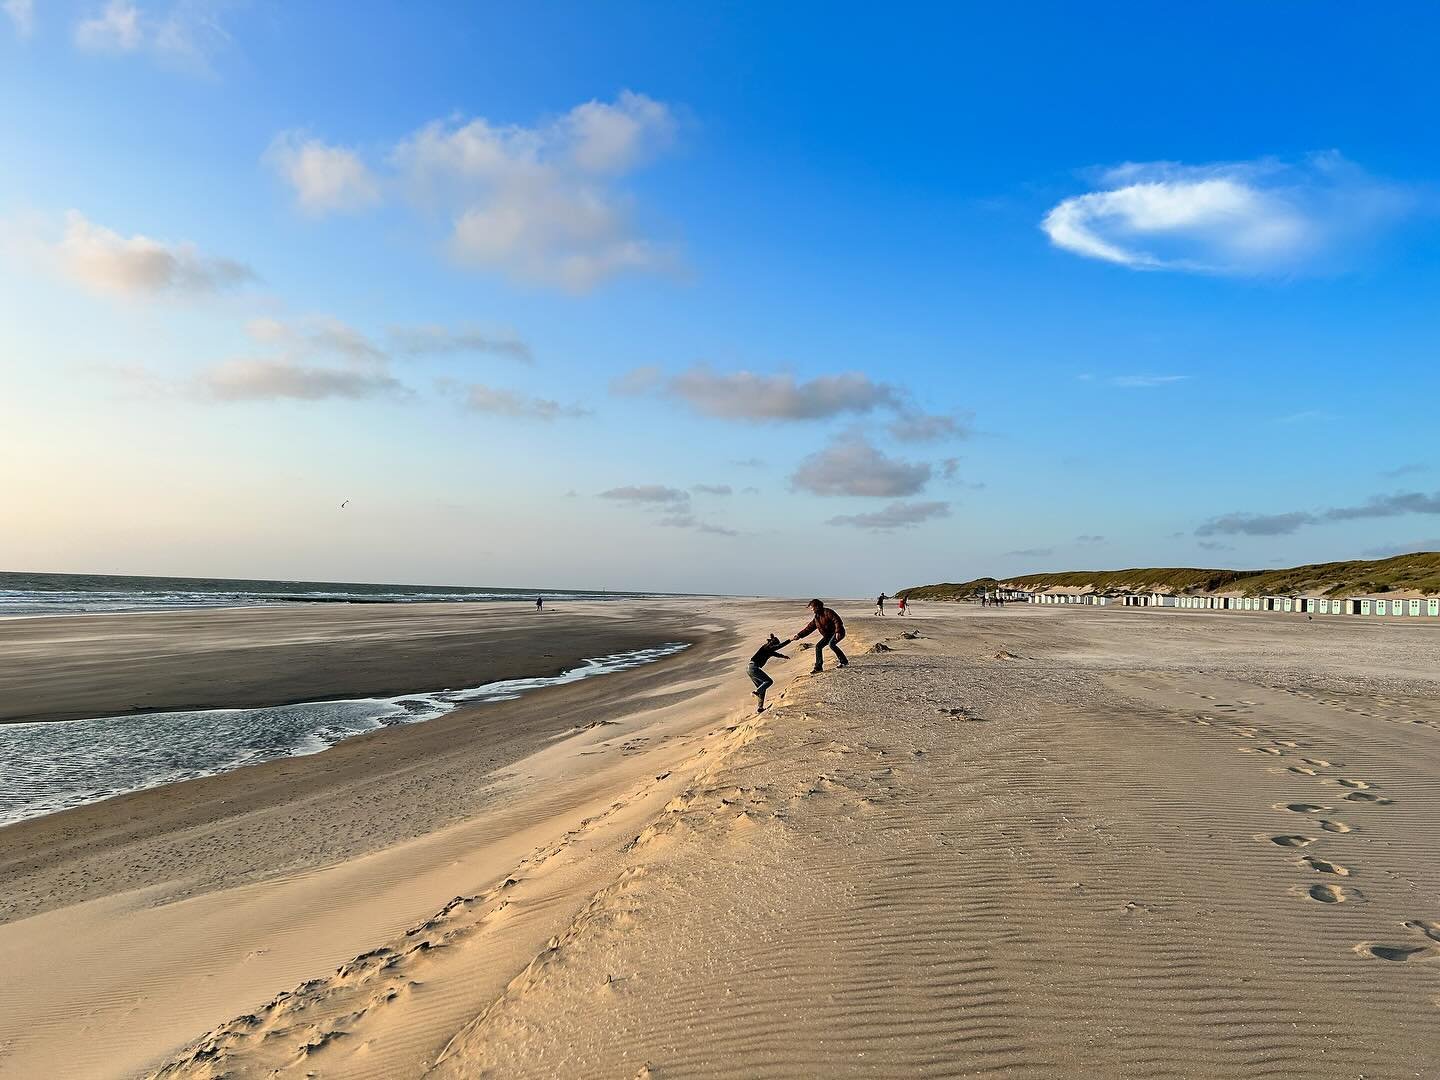 Nothing beats an empty beach. While staying at the island of Texel in the Netherlands. See our review at www.topwithkids.com and find out about 150+ amazing family friendly destinations world-wide. 

#travel #familytime #familytrip #familyvacation #h